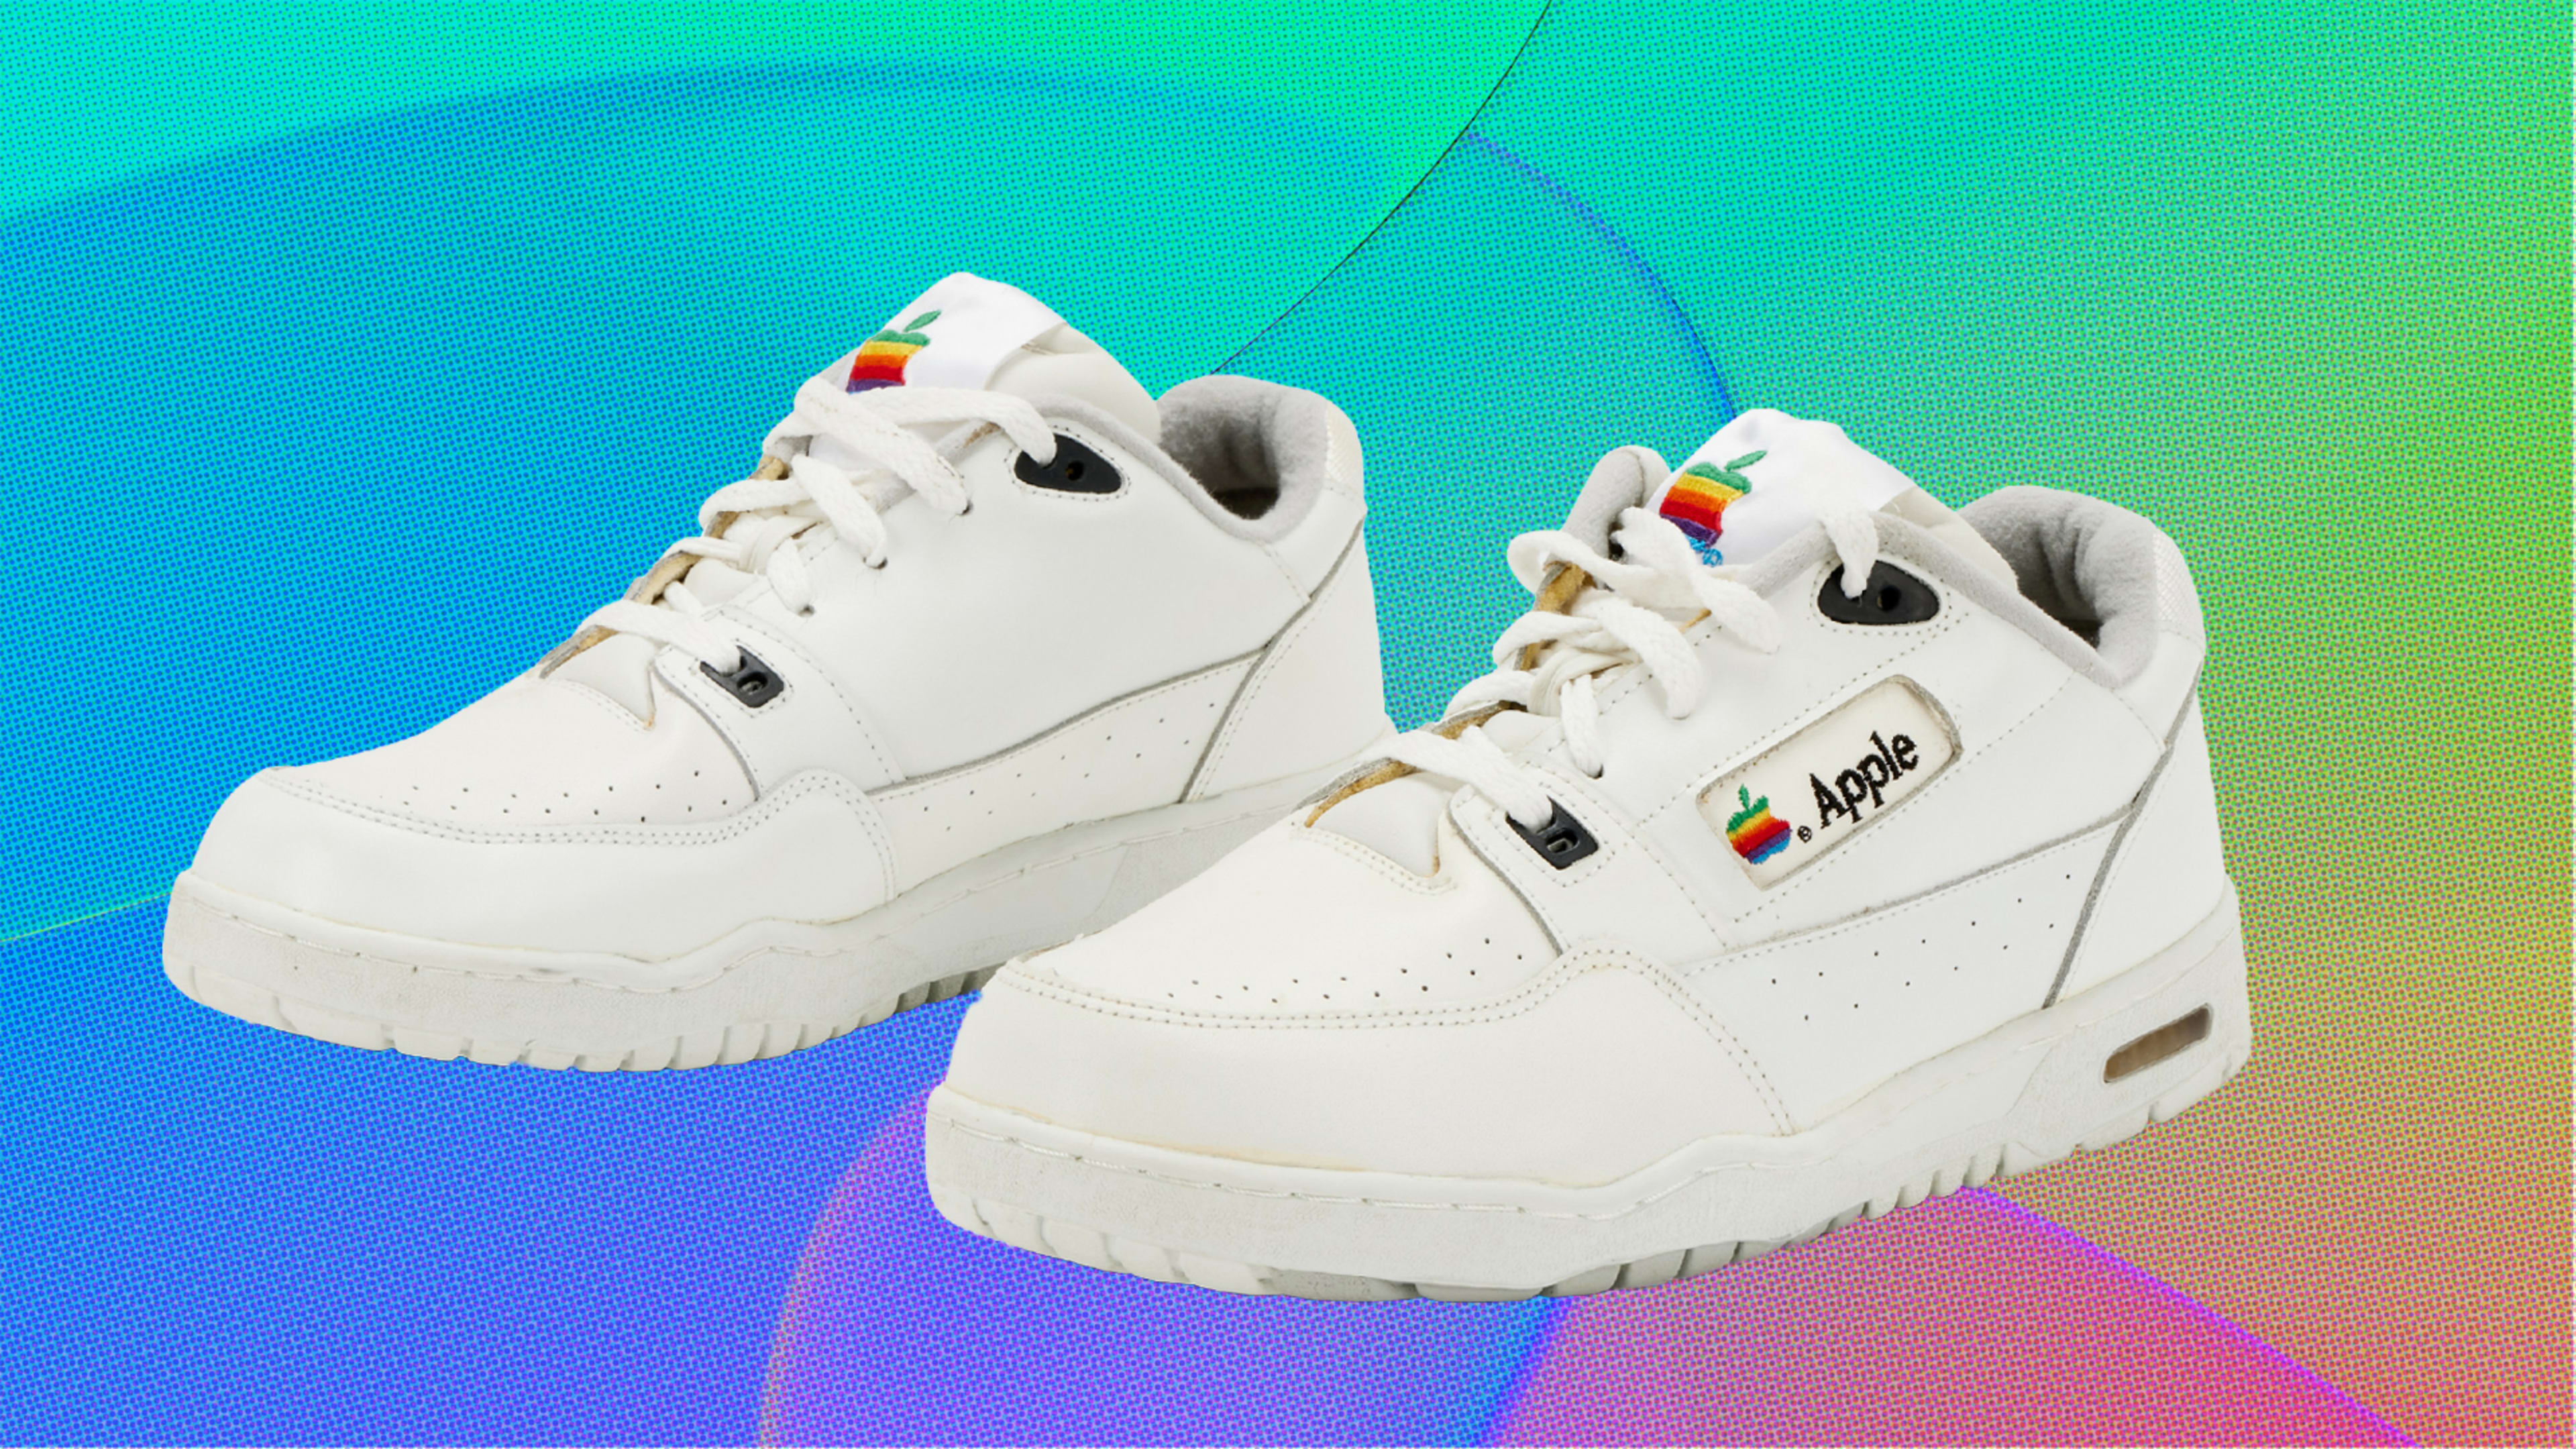 These rare Apple sneakers are selling for $50,000